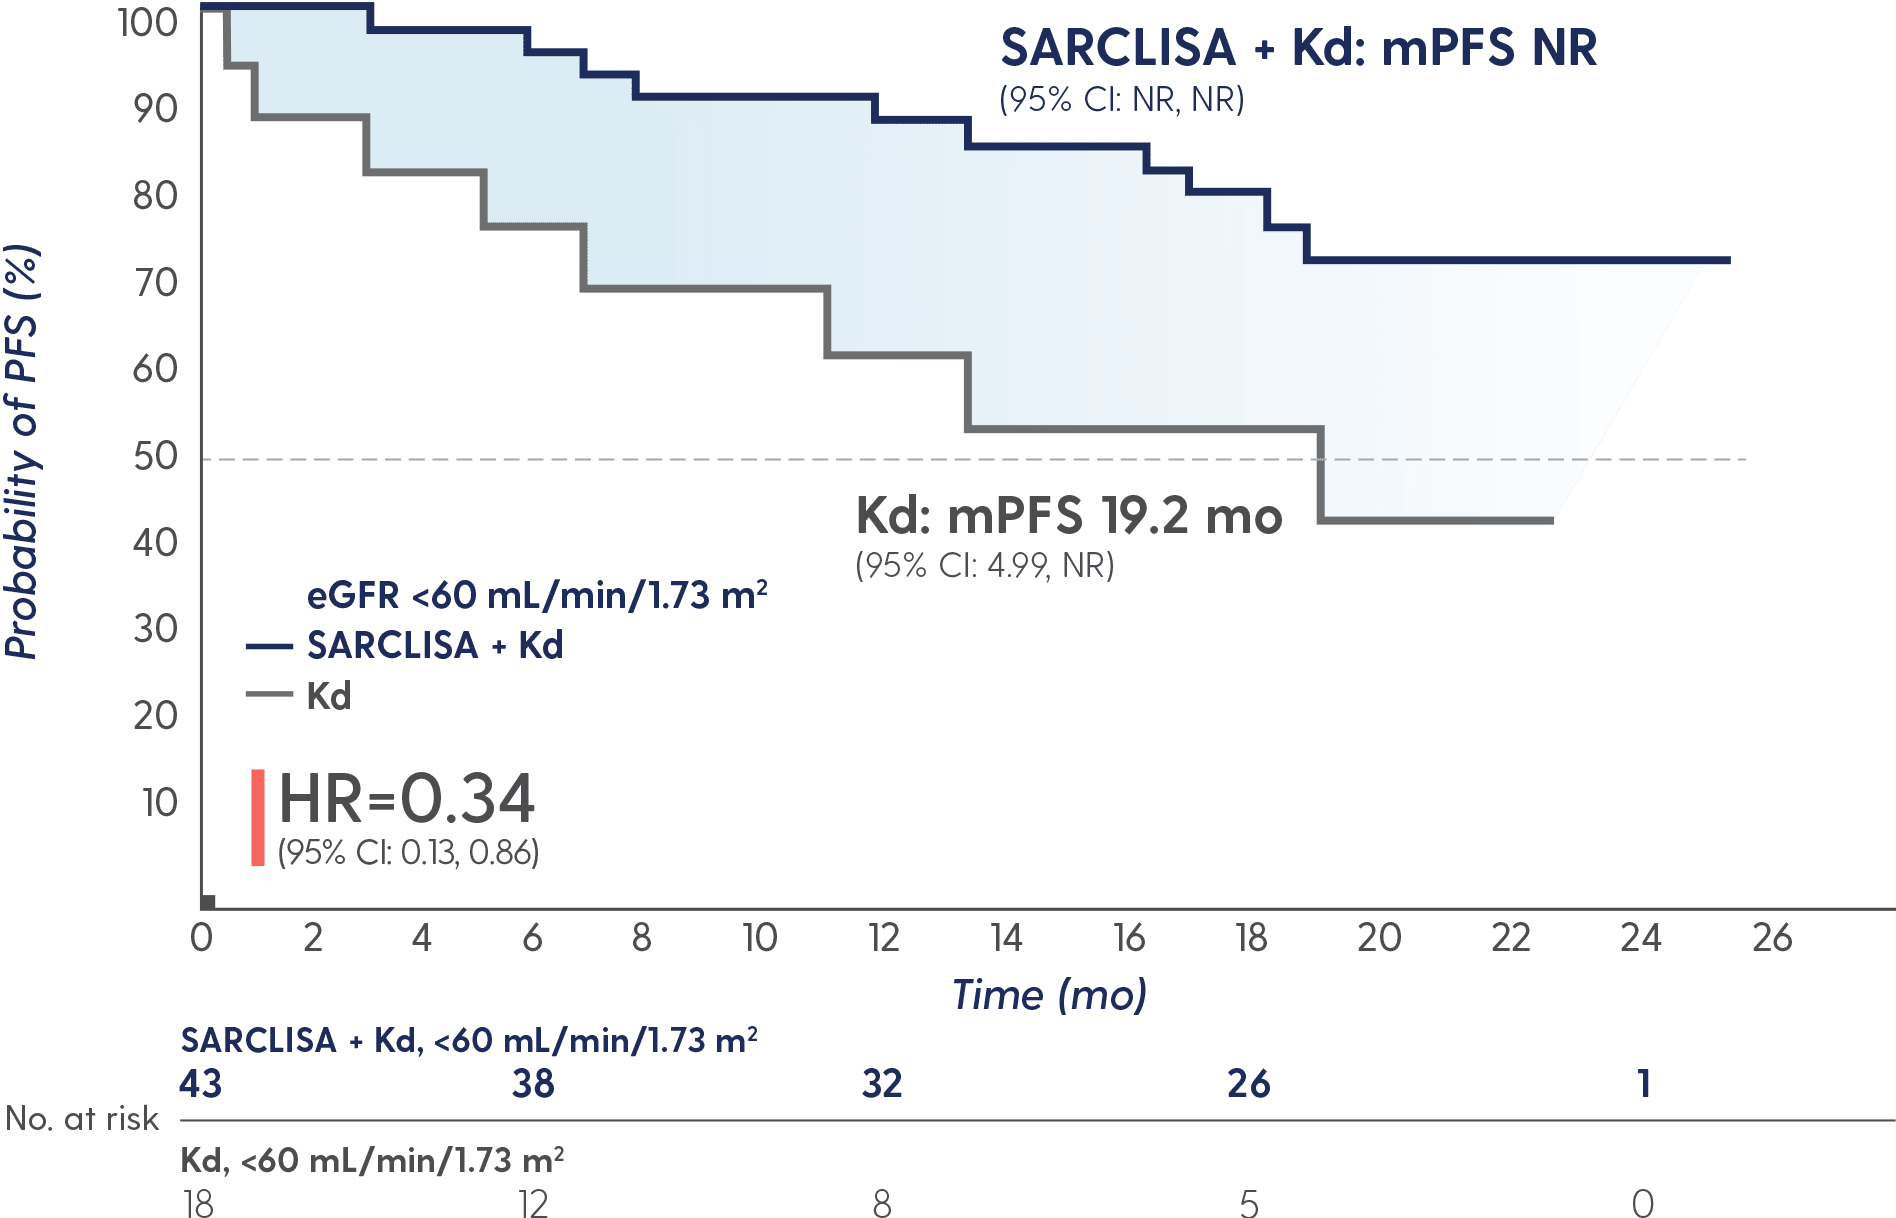 In patients with renal impairment, median PFS not reached (NR) (95% CI: NR, NR) with SARCLISA + Kd vs 19.2
                              months (95% CI: 4.99, NR) with Kd alone; HR=0.34 (95% CI: 0.13, 0.86).